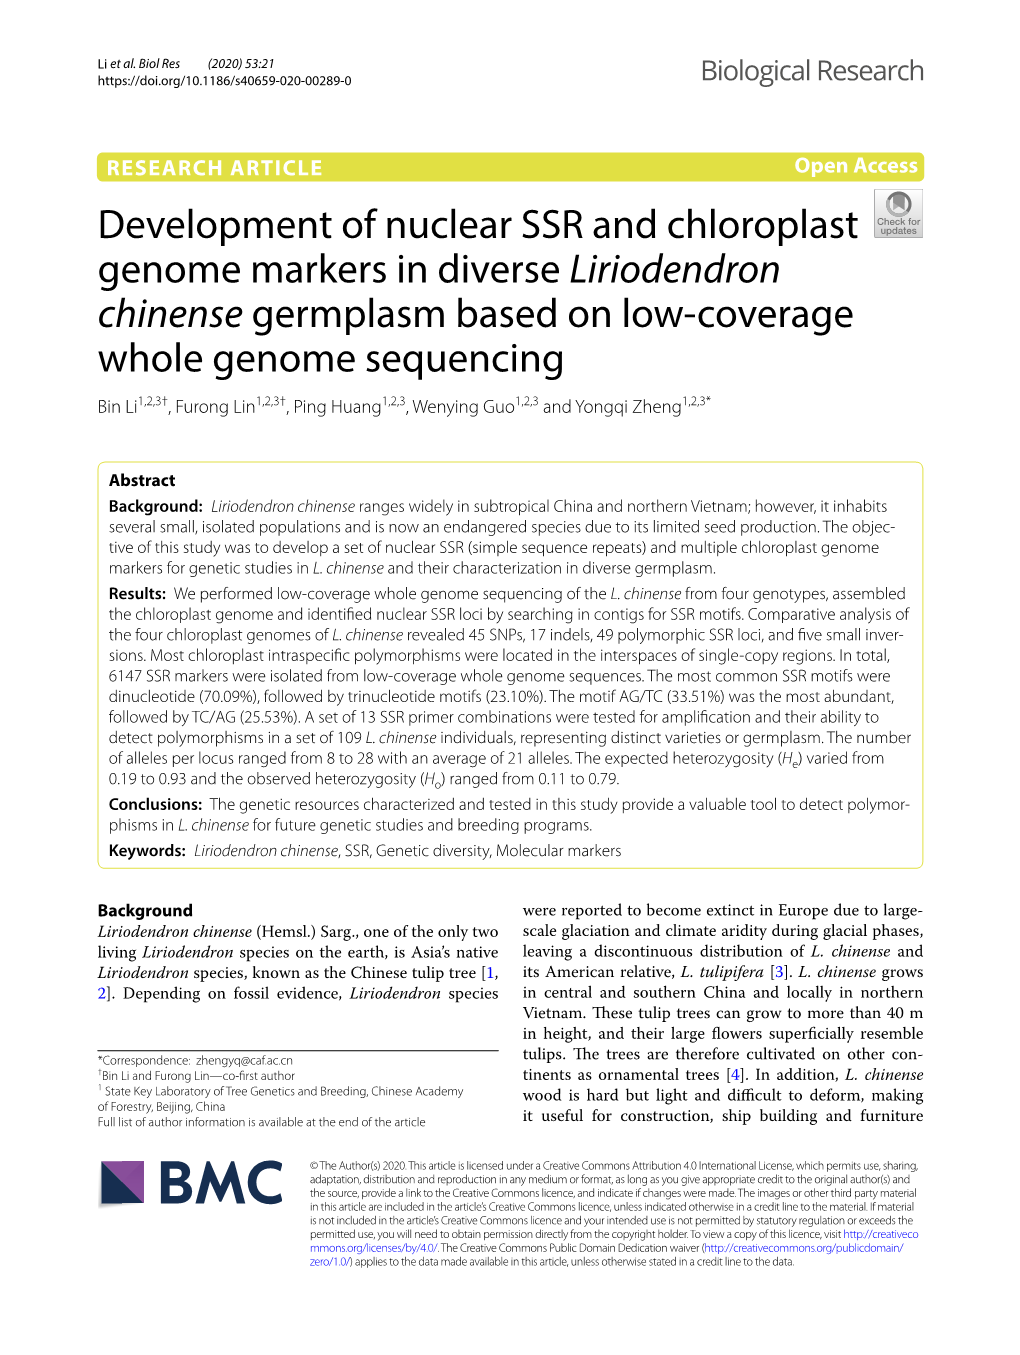 Development of Nuclear SSR and Chloroplast Genome Markers In